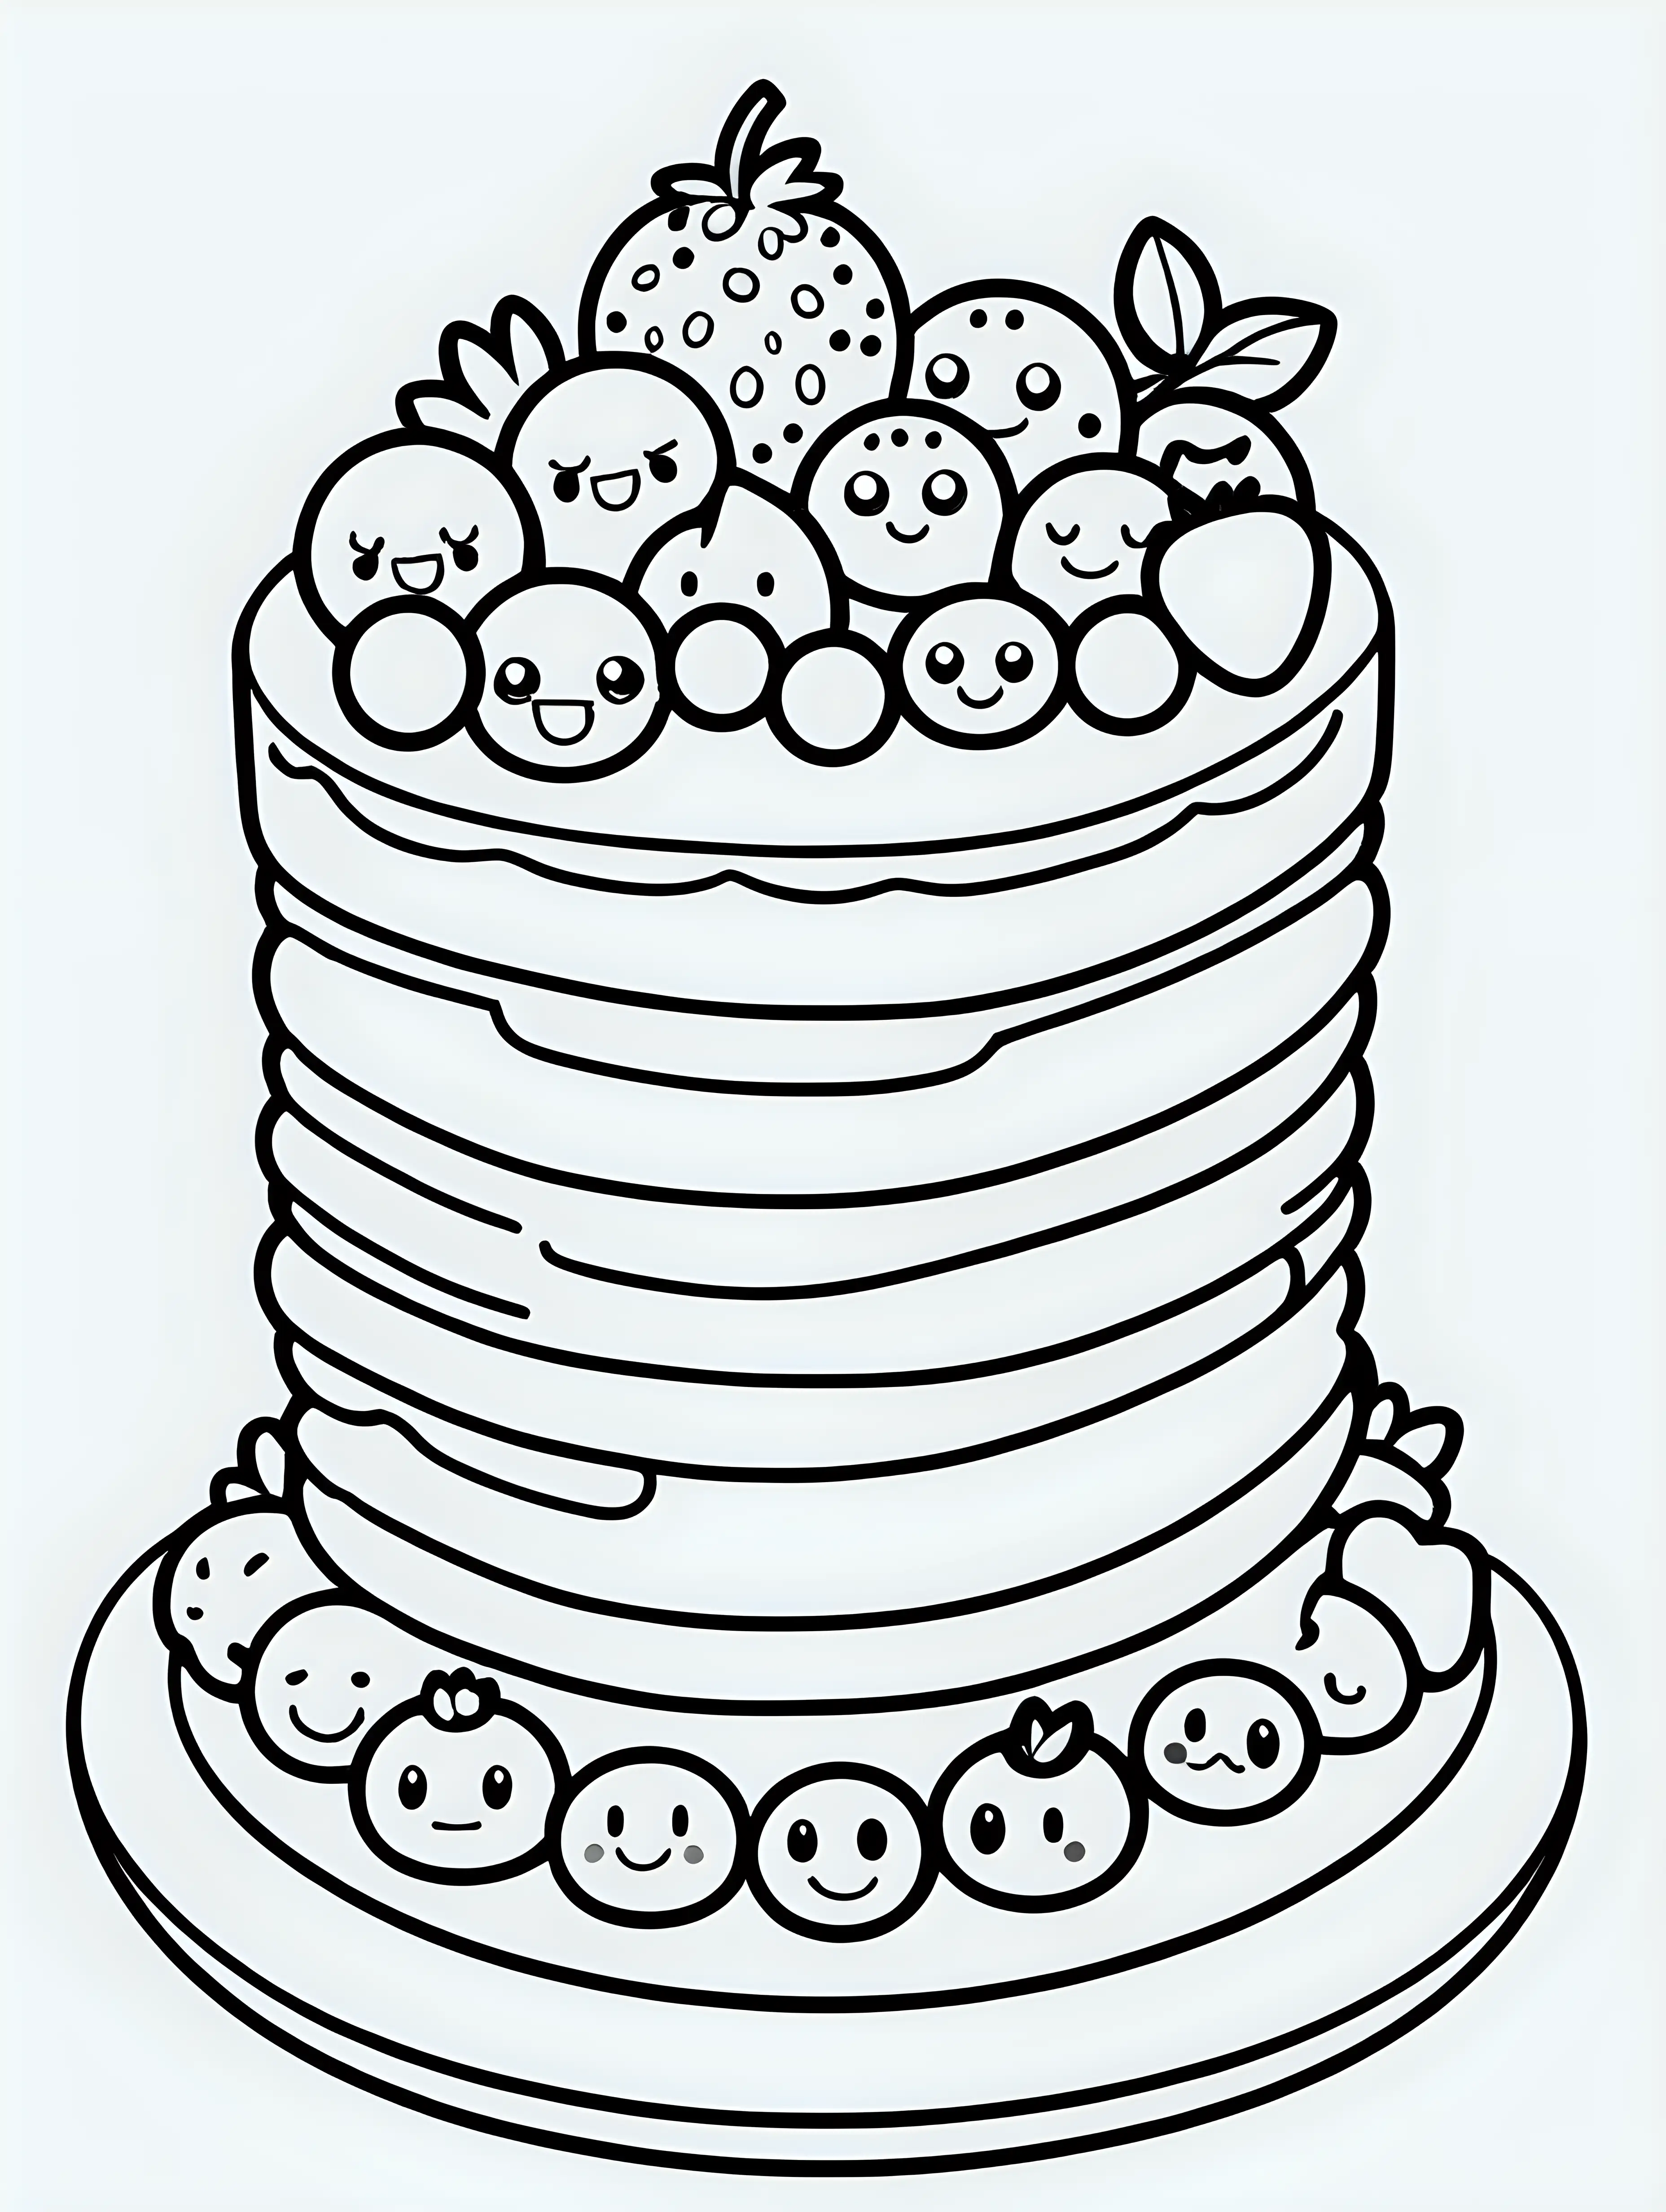 coloring book, cartoon drawing, clean black and white, single line, white background, cute berry cake, emojis